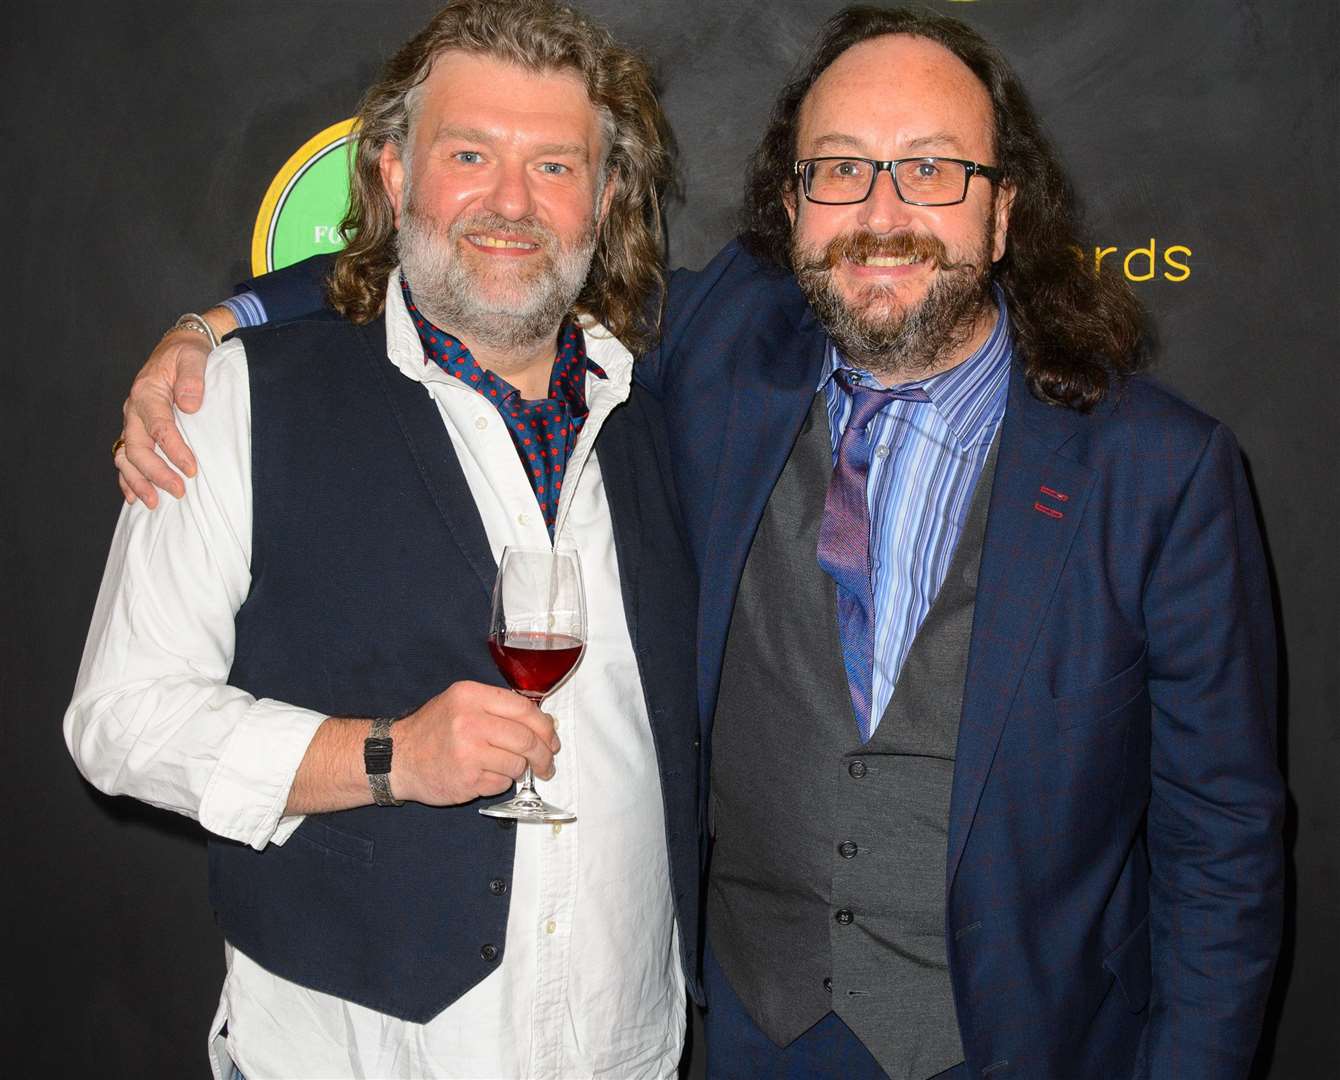 Si King and Dave Myers, The Hairy Bikers, will be on stage in Kent Picture: PA Photos